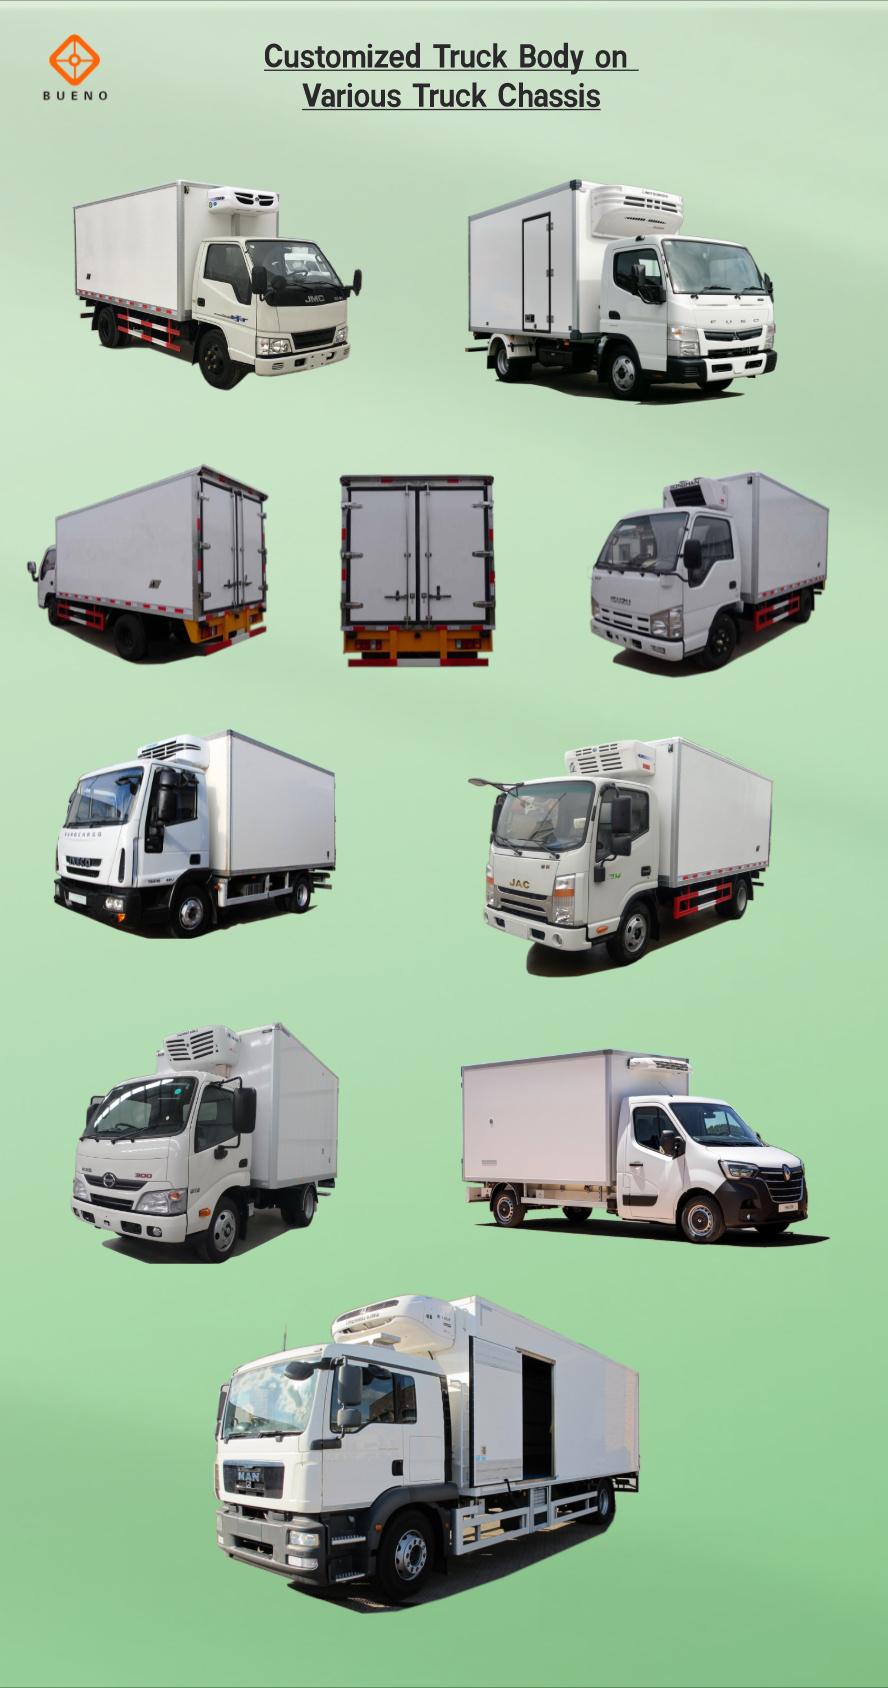 Bueno 1.0t Refrigerated Truck Body for Pickup Refrigerated Truck